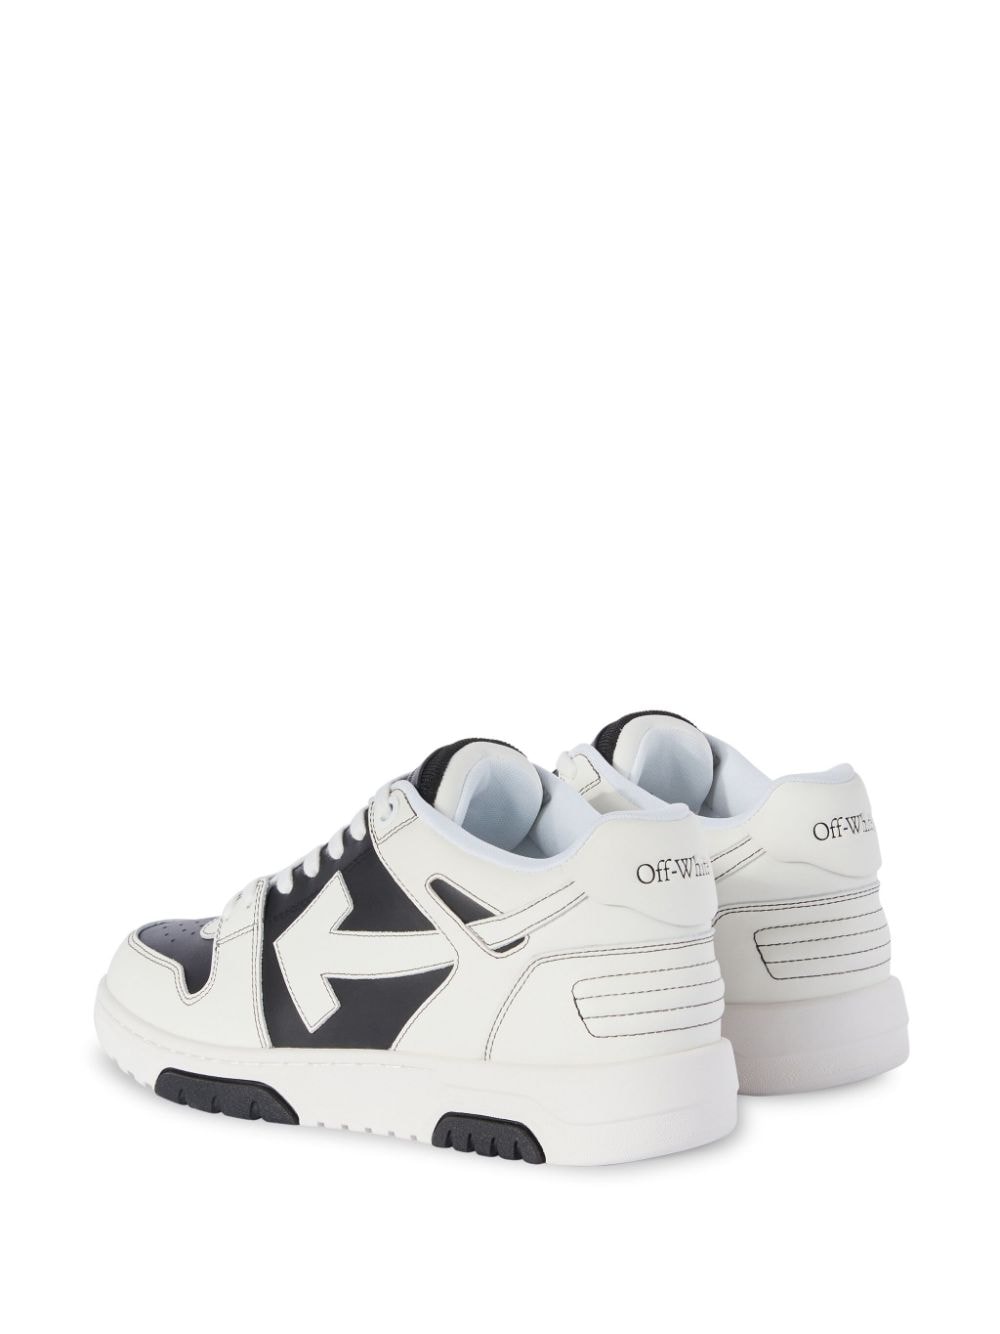 Off-white Baskets Out of Office 'Ooo' Noir - Lothaire